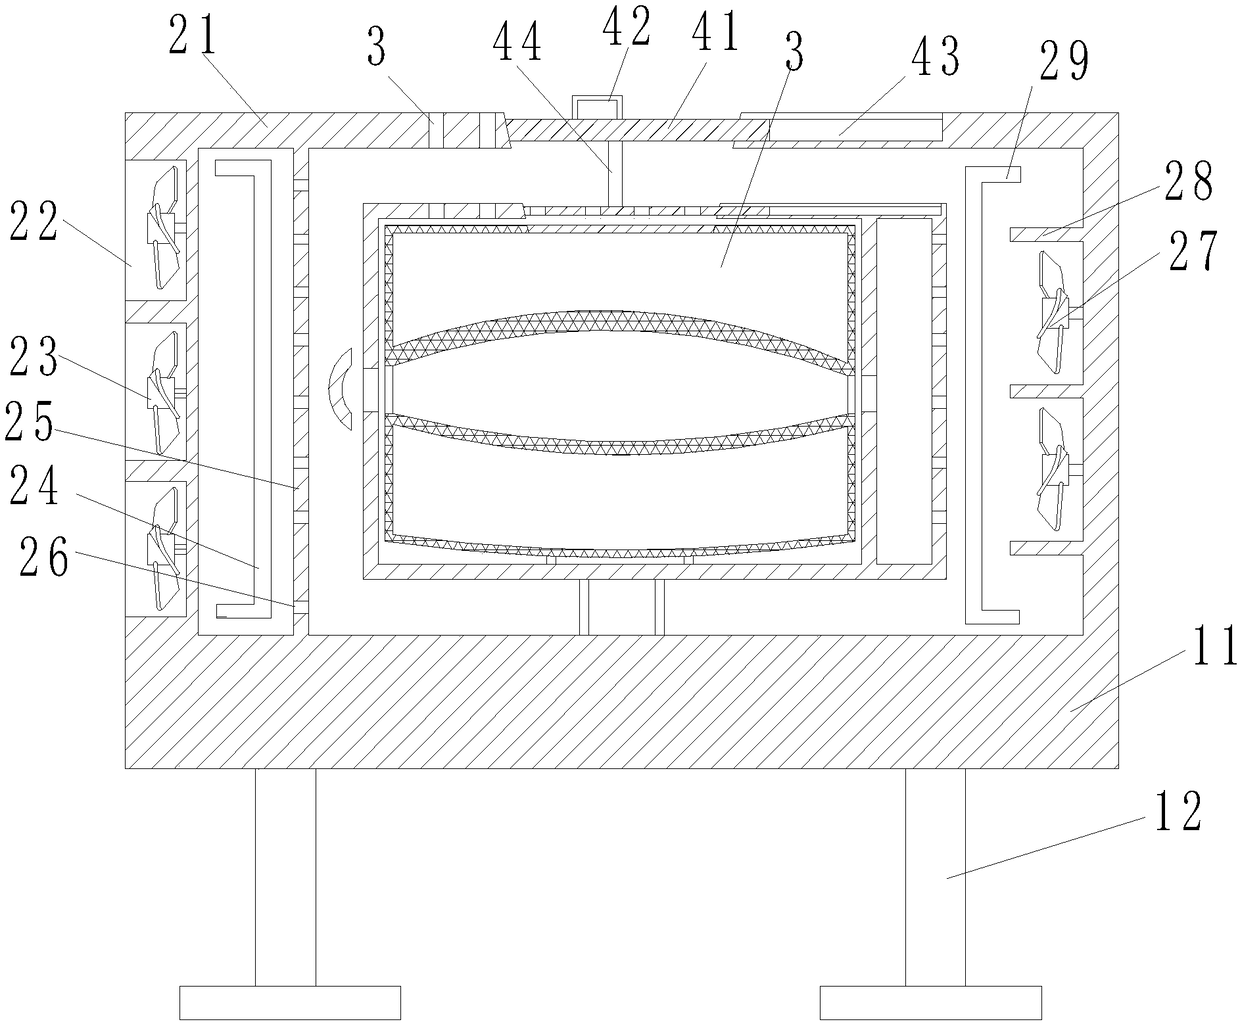 Tea leaf drying and primary screening device